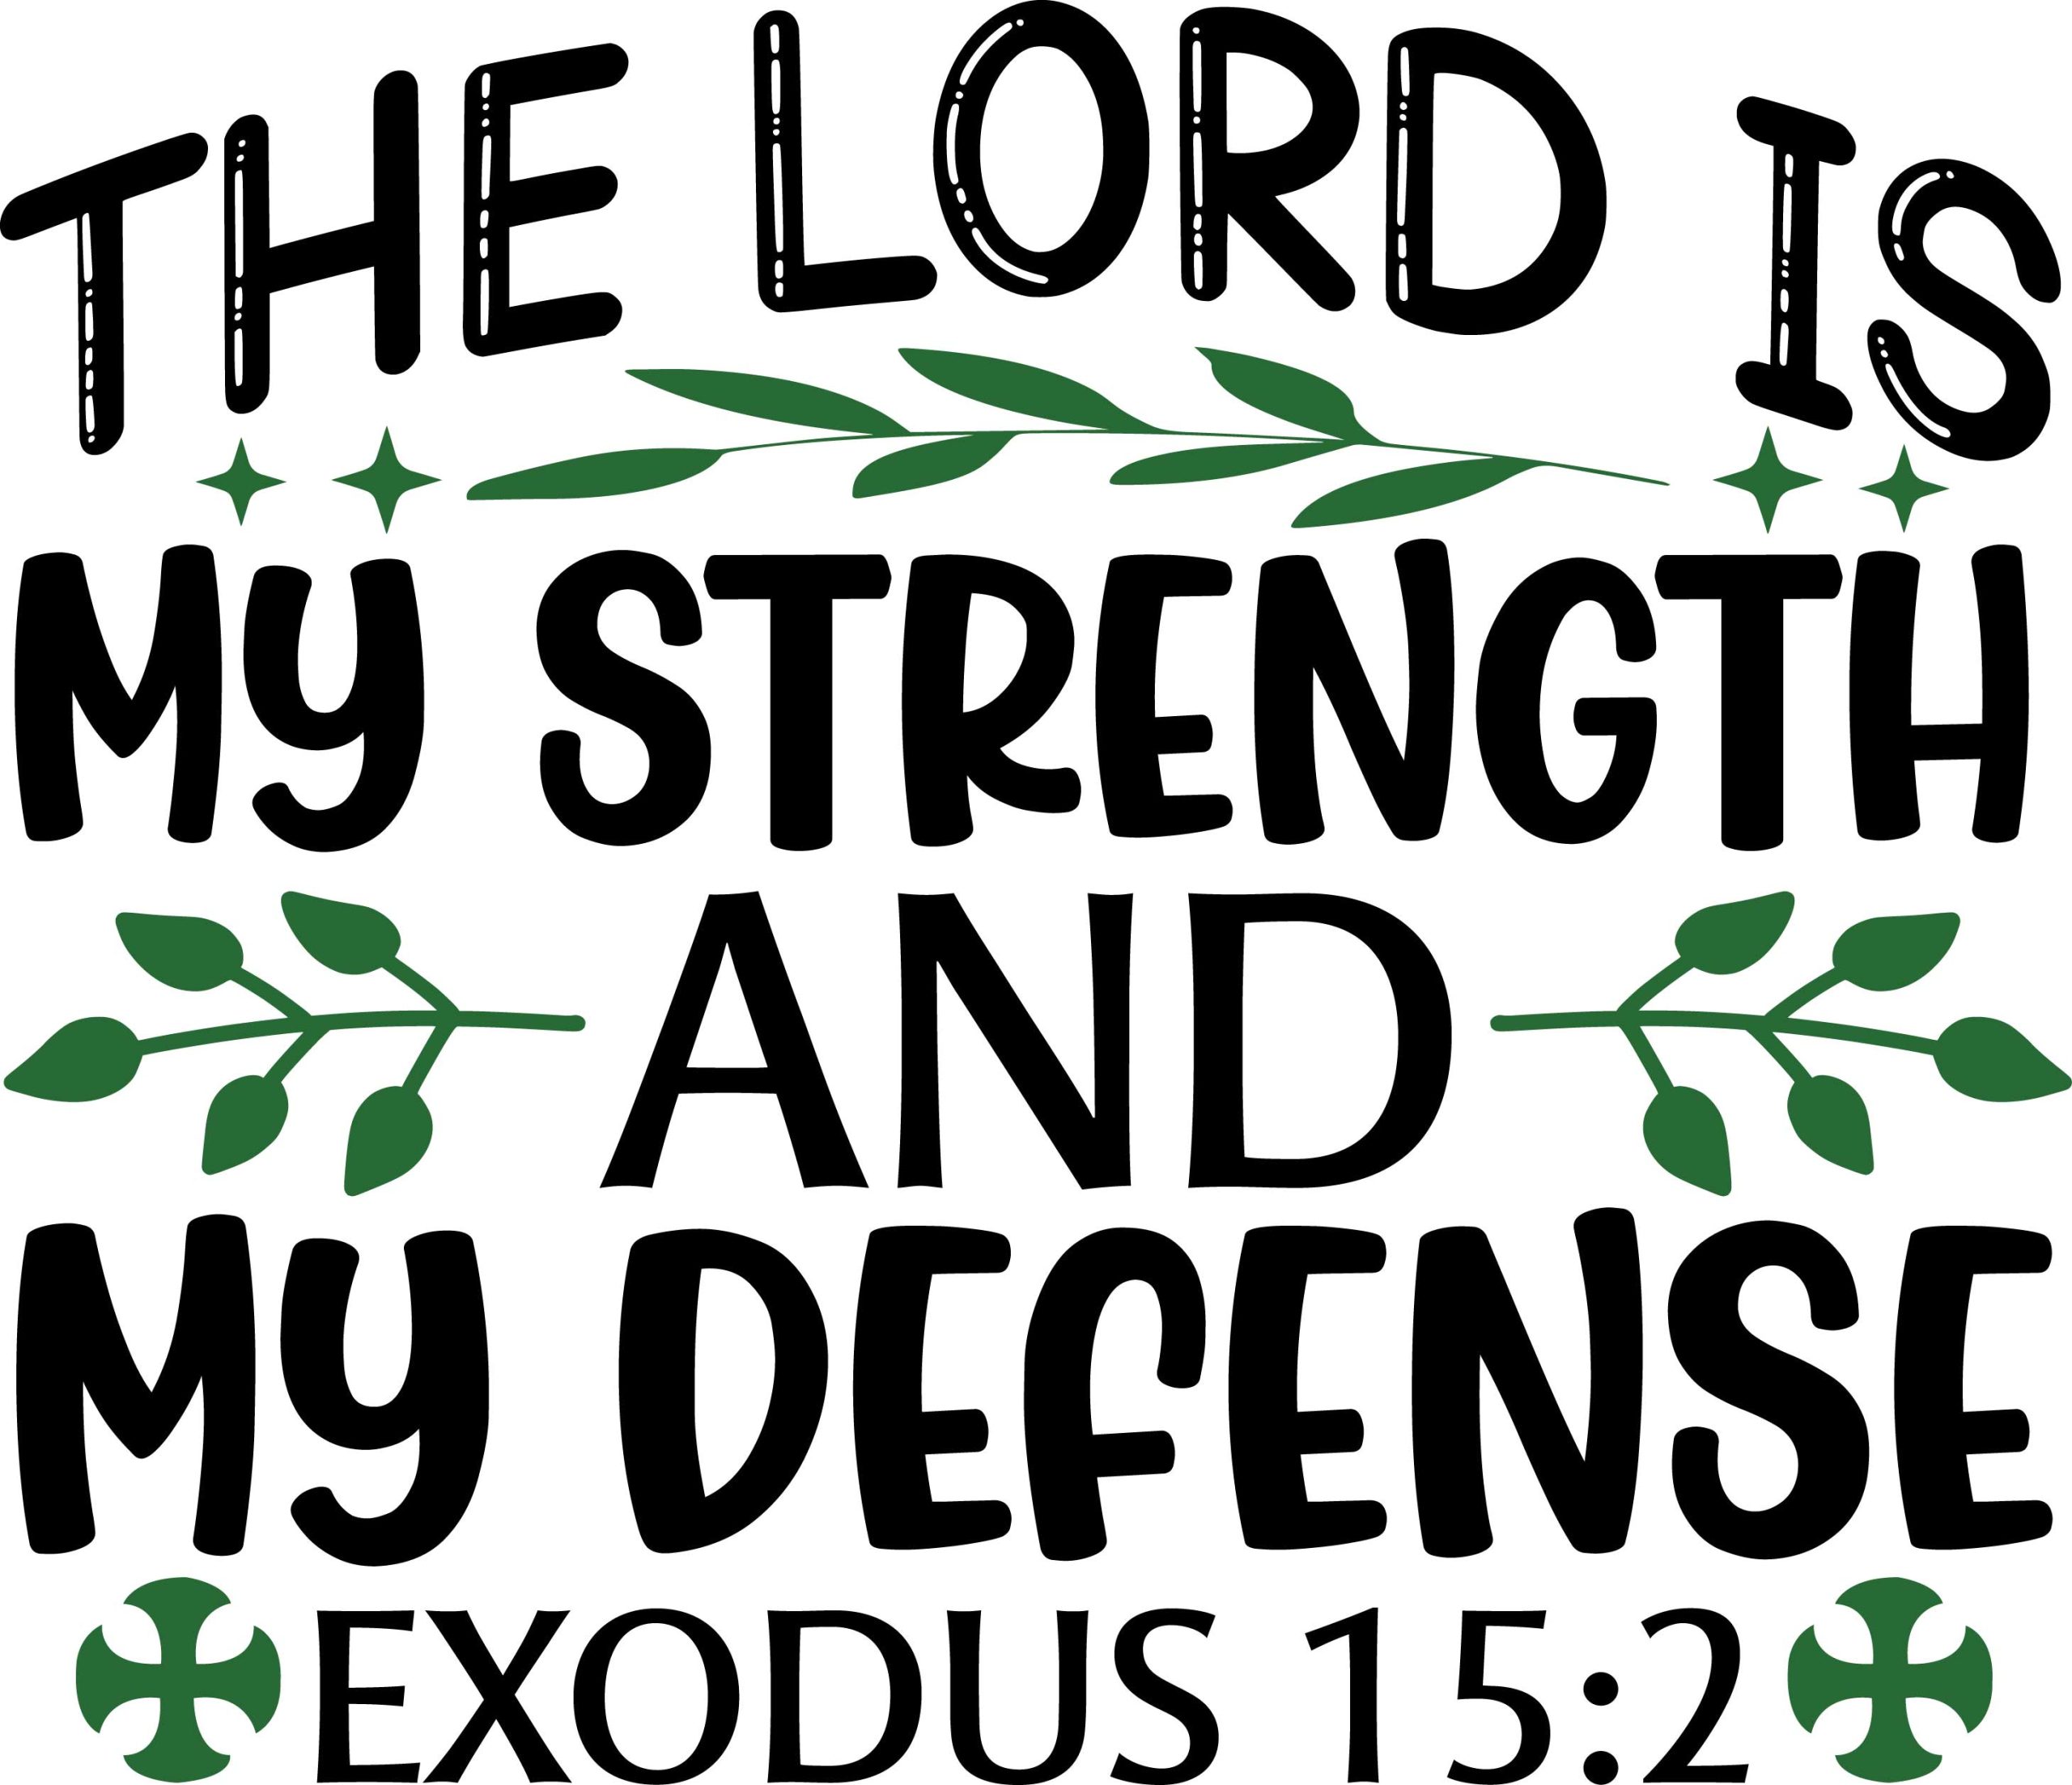 The lord is my strength and my defense exodus 15:2, bible verses, scripture verses, svg files, passages, sayings, cricut designs, silhouette, embroidery, bundle, free cut files, design space, vector